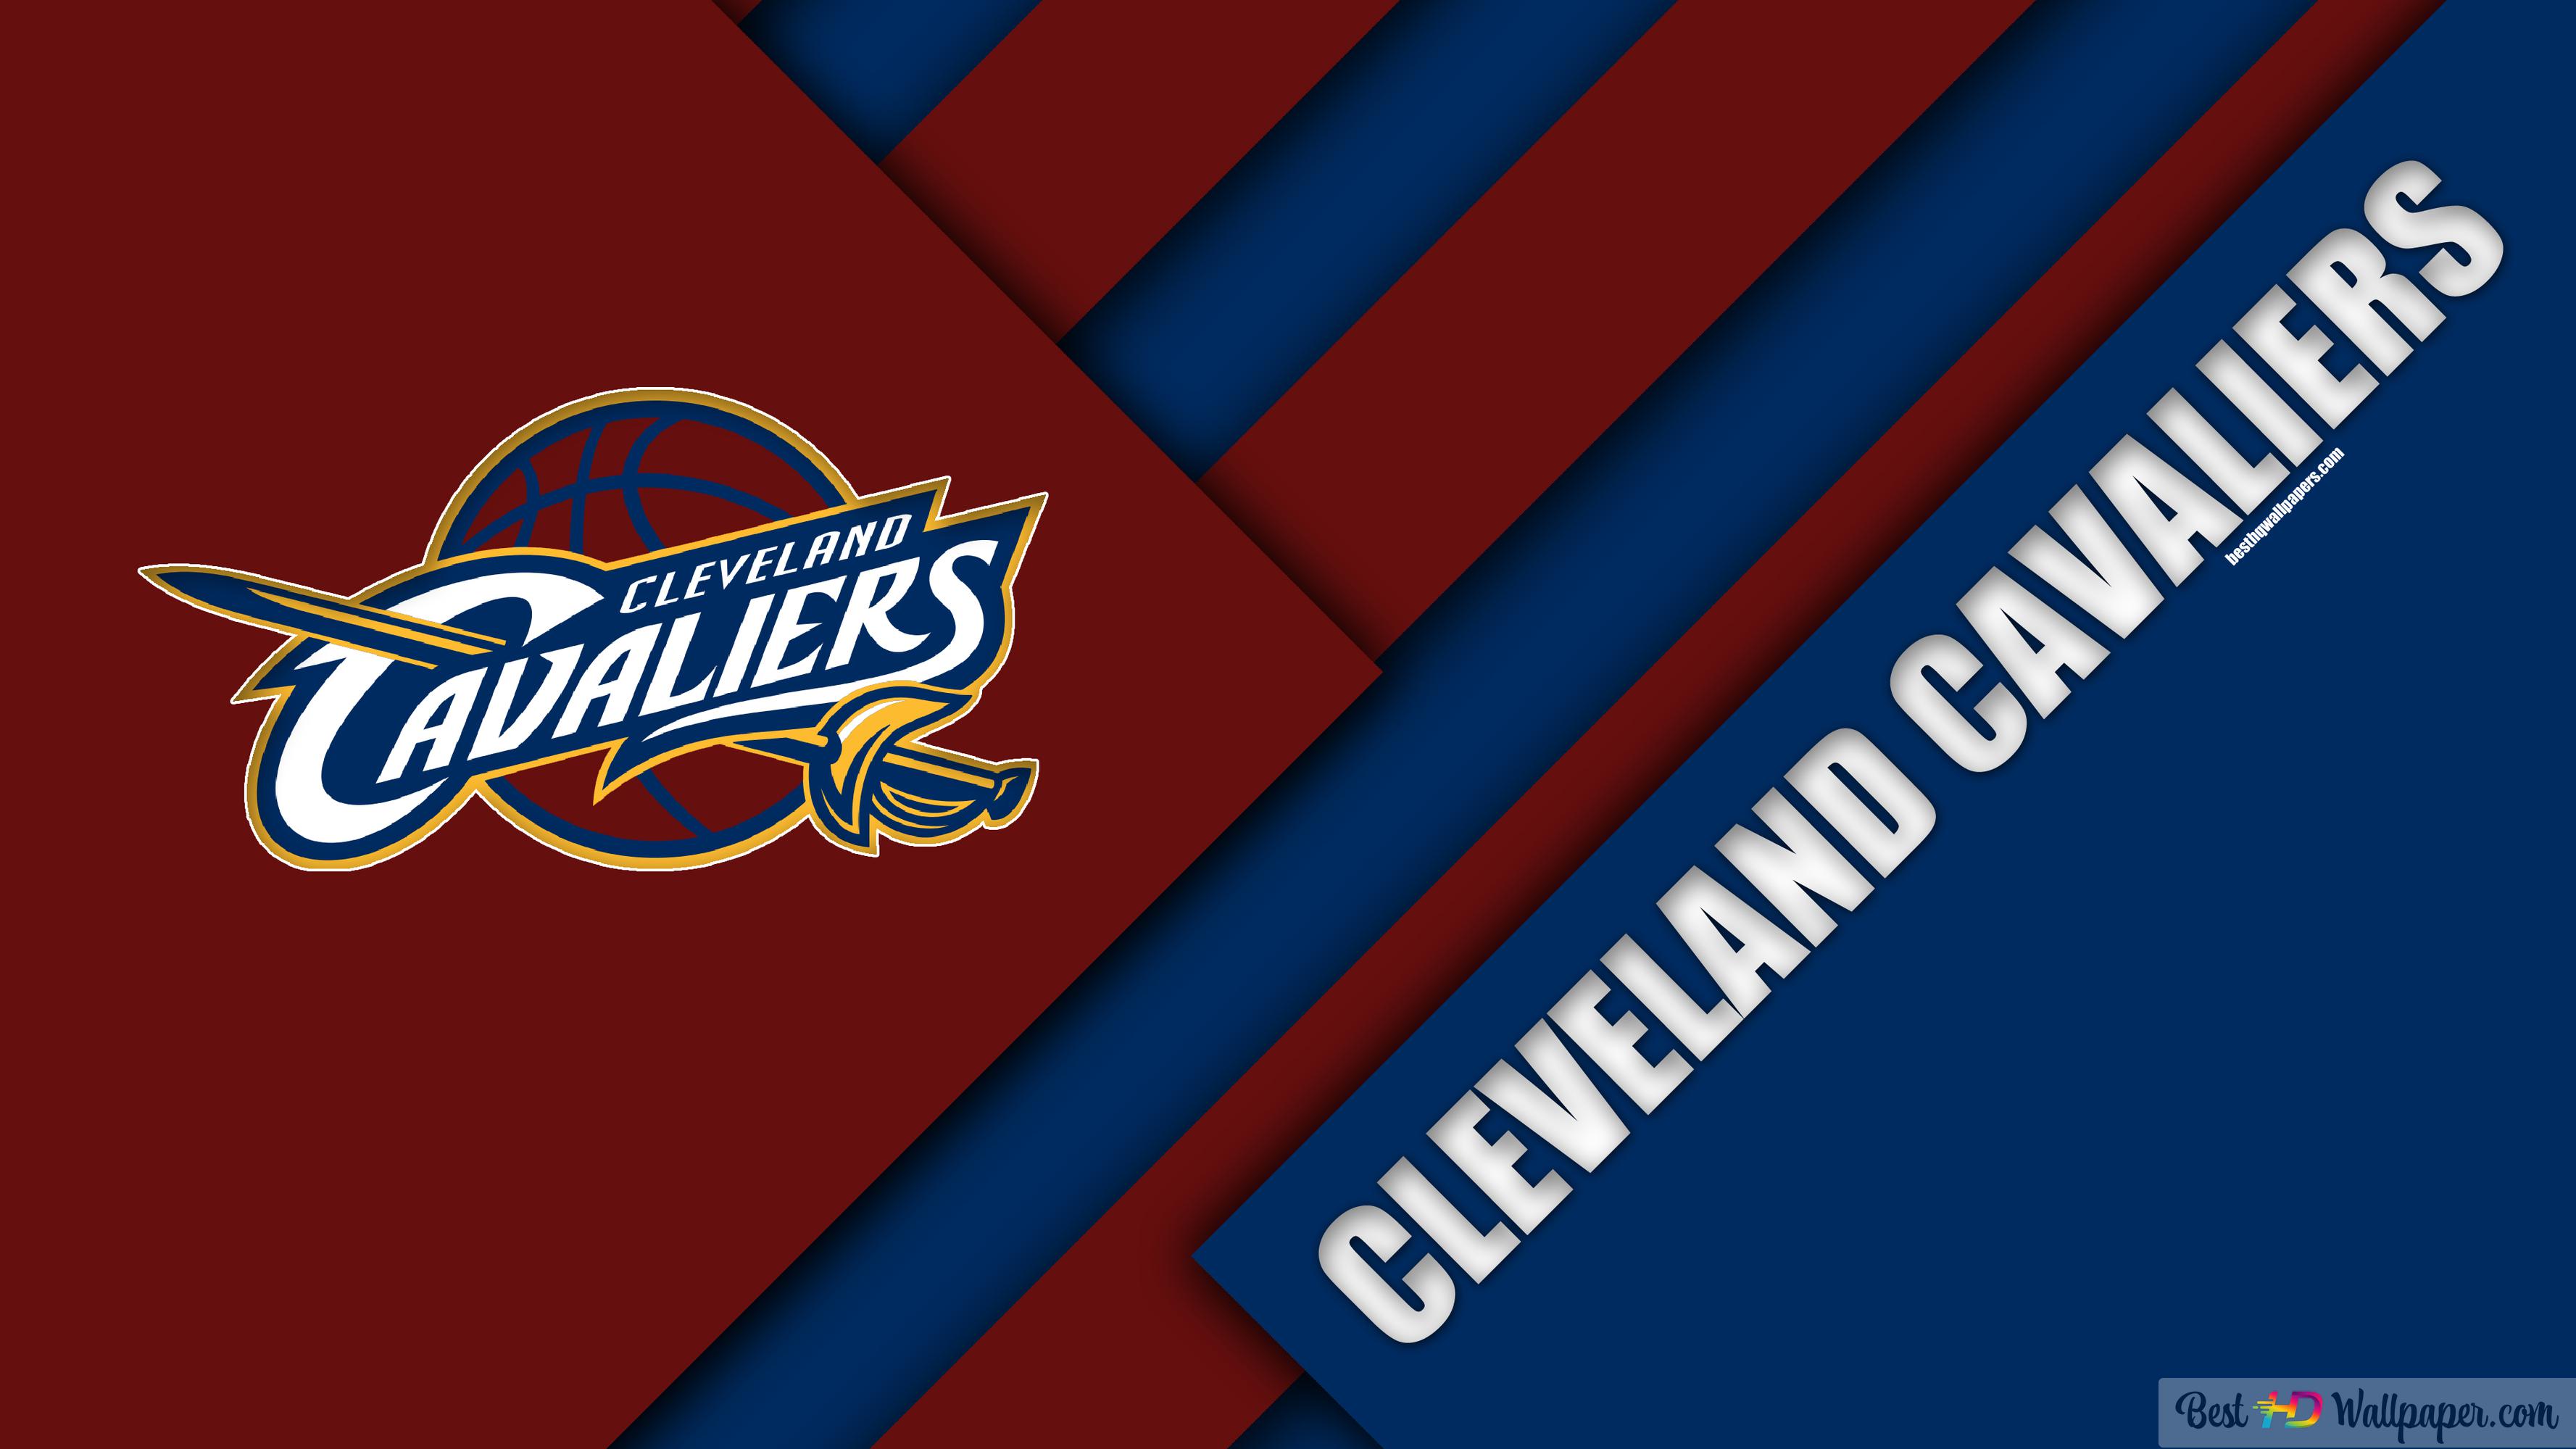 Cleveland Cavaliers HD wallpaper download